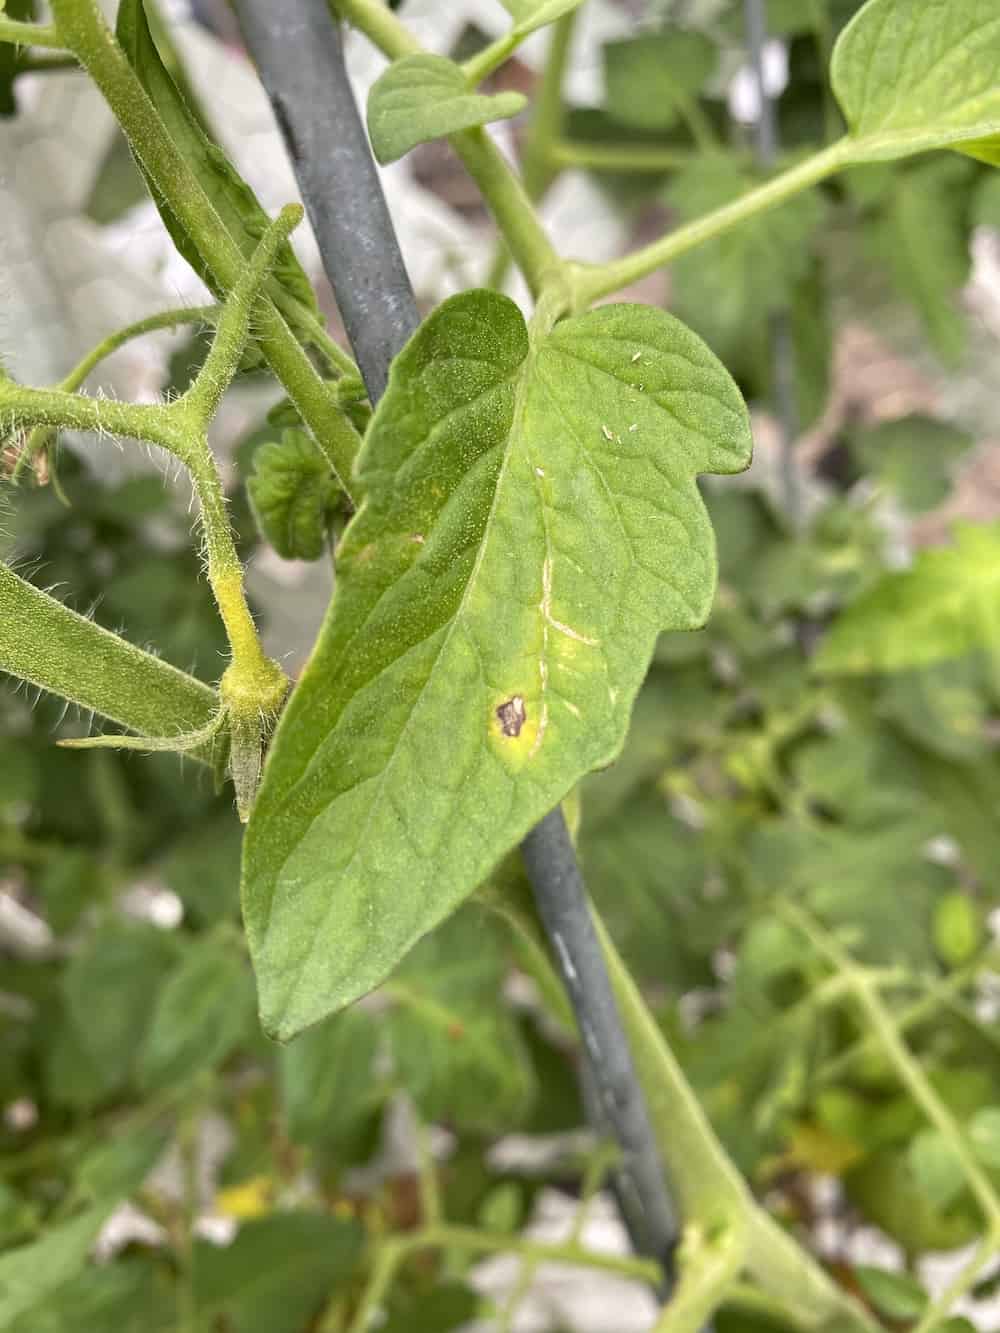 picture of tomato leaf with early signs of tomato blight